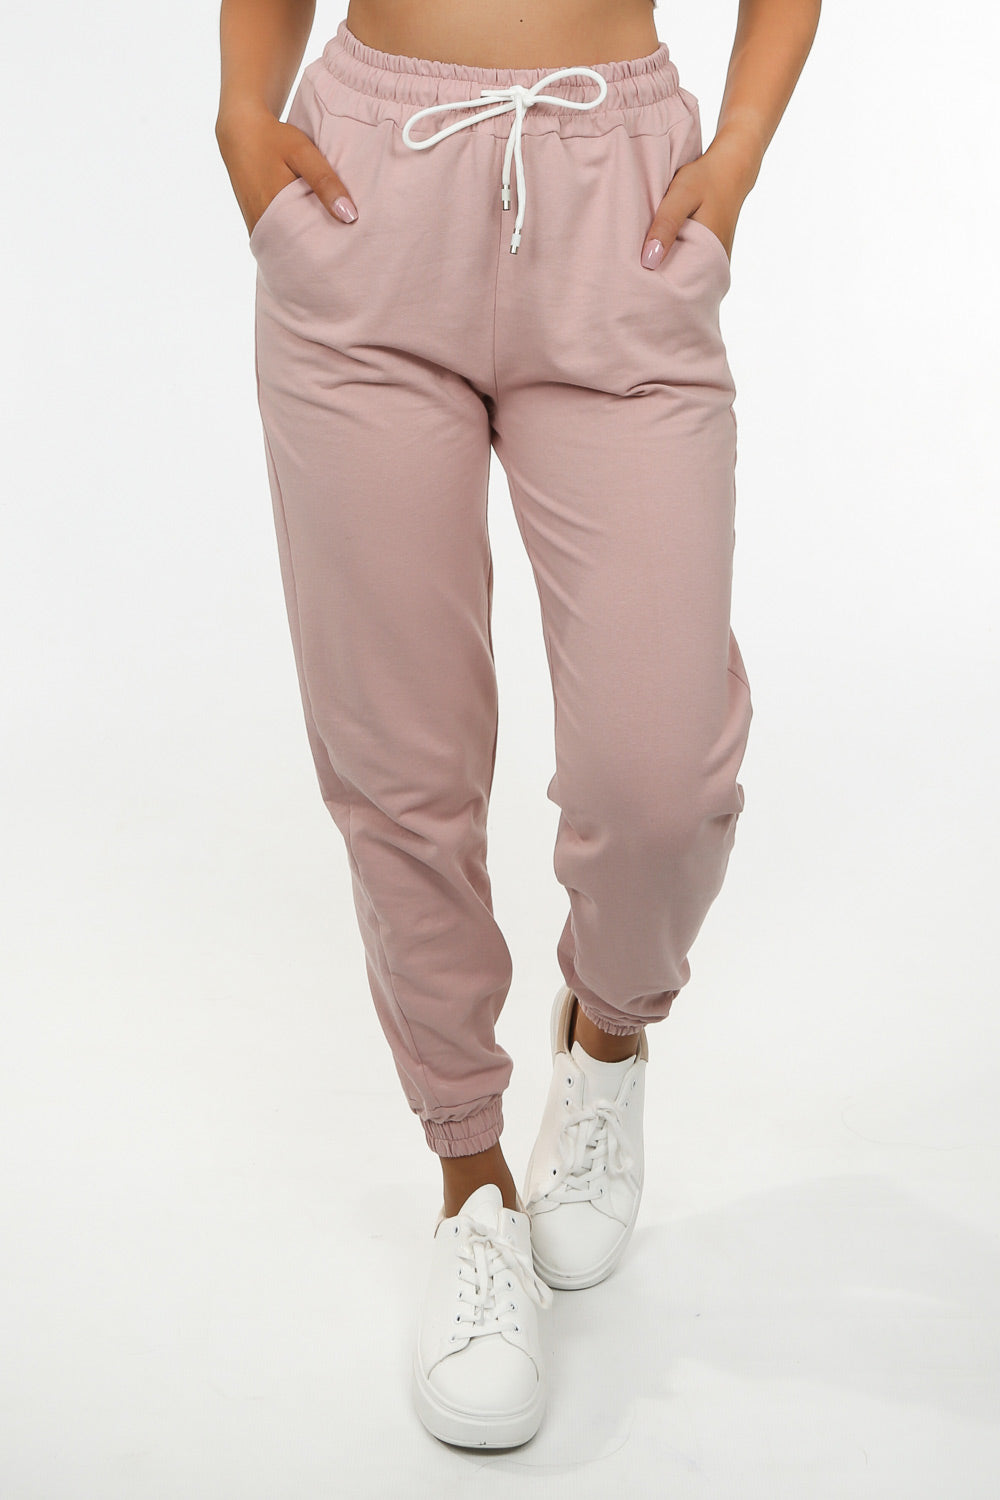 Baby Pink Skinny Joggers